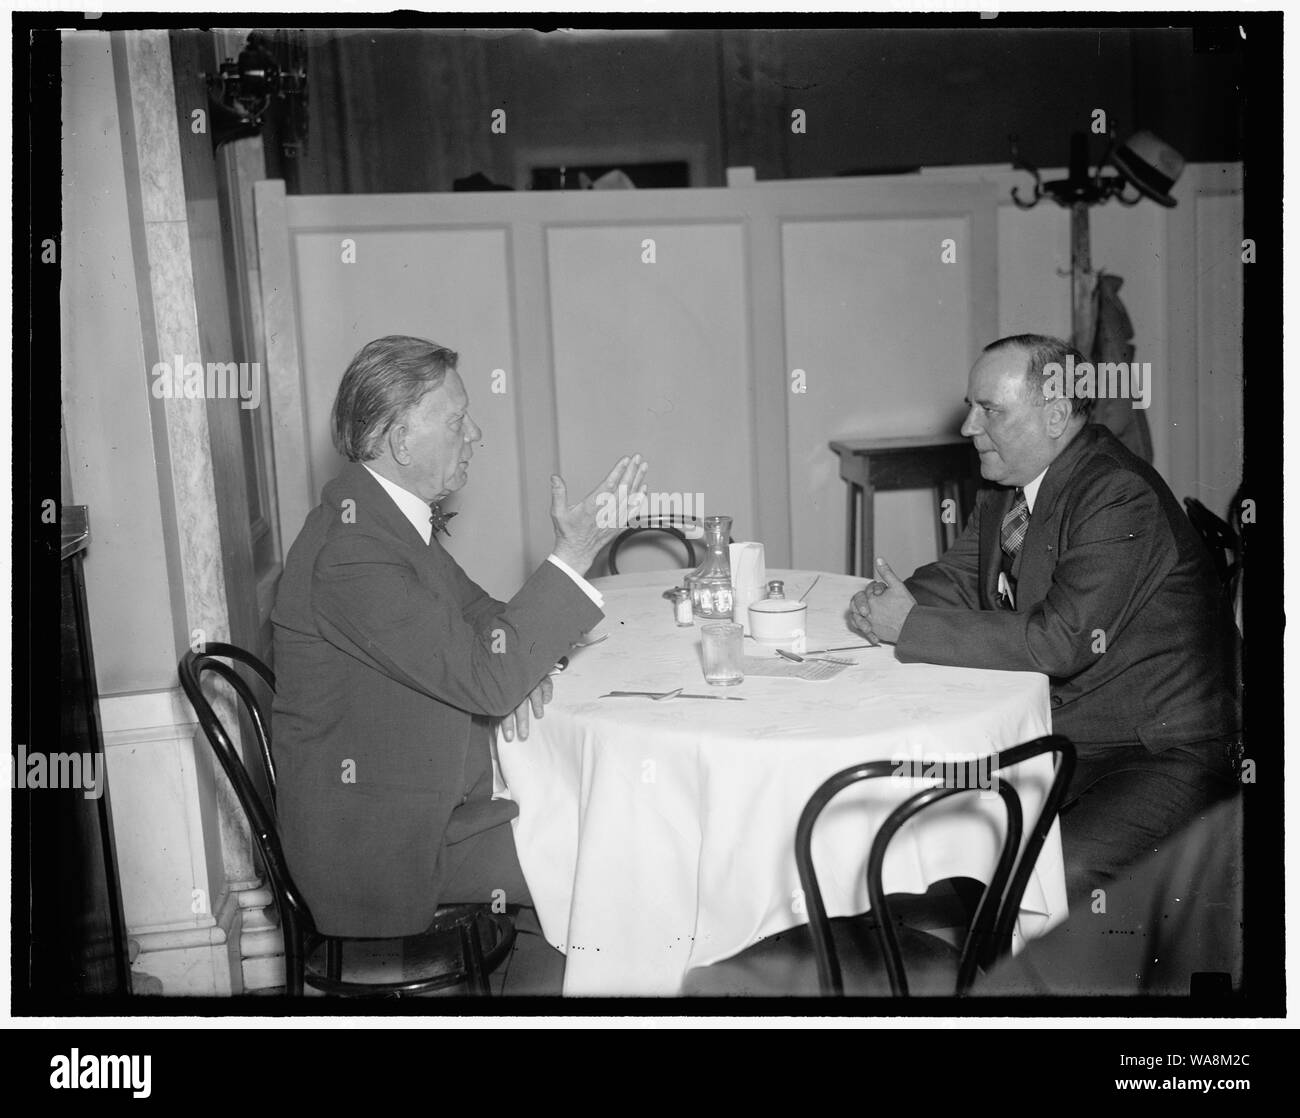 Capitol lunch for two. Washington, D.C., Dec. 21. Party lines are forgotten when members of the United States Senate [...] the Capitol Restaurant for luncheon. The diner is the favorite spot right now the as the Senators return for the coming session [...] Here we see the Republican Senator William E. Borah of Idaho, Driving home a point in a discussion [with] Senator Bennett Champ Clark, of Missouri, as [...] listens Stock Photo